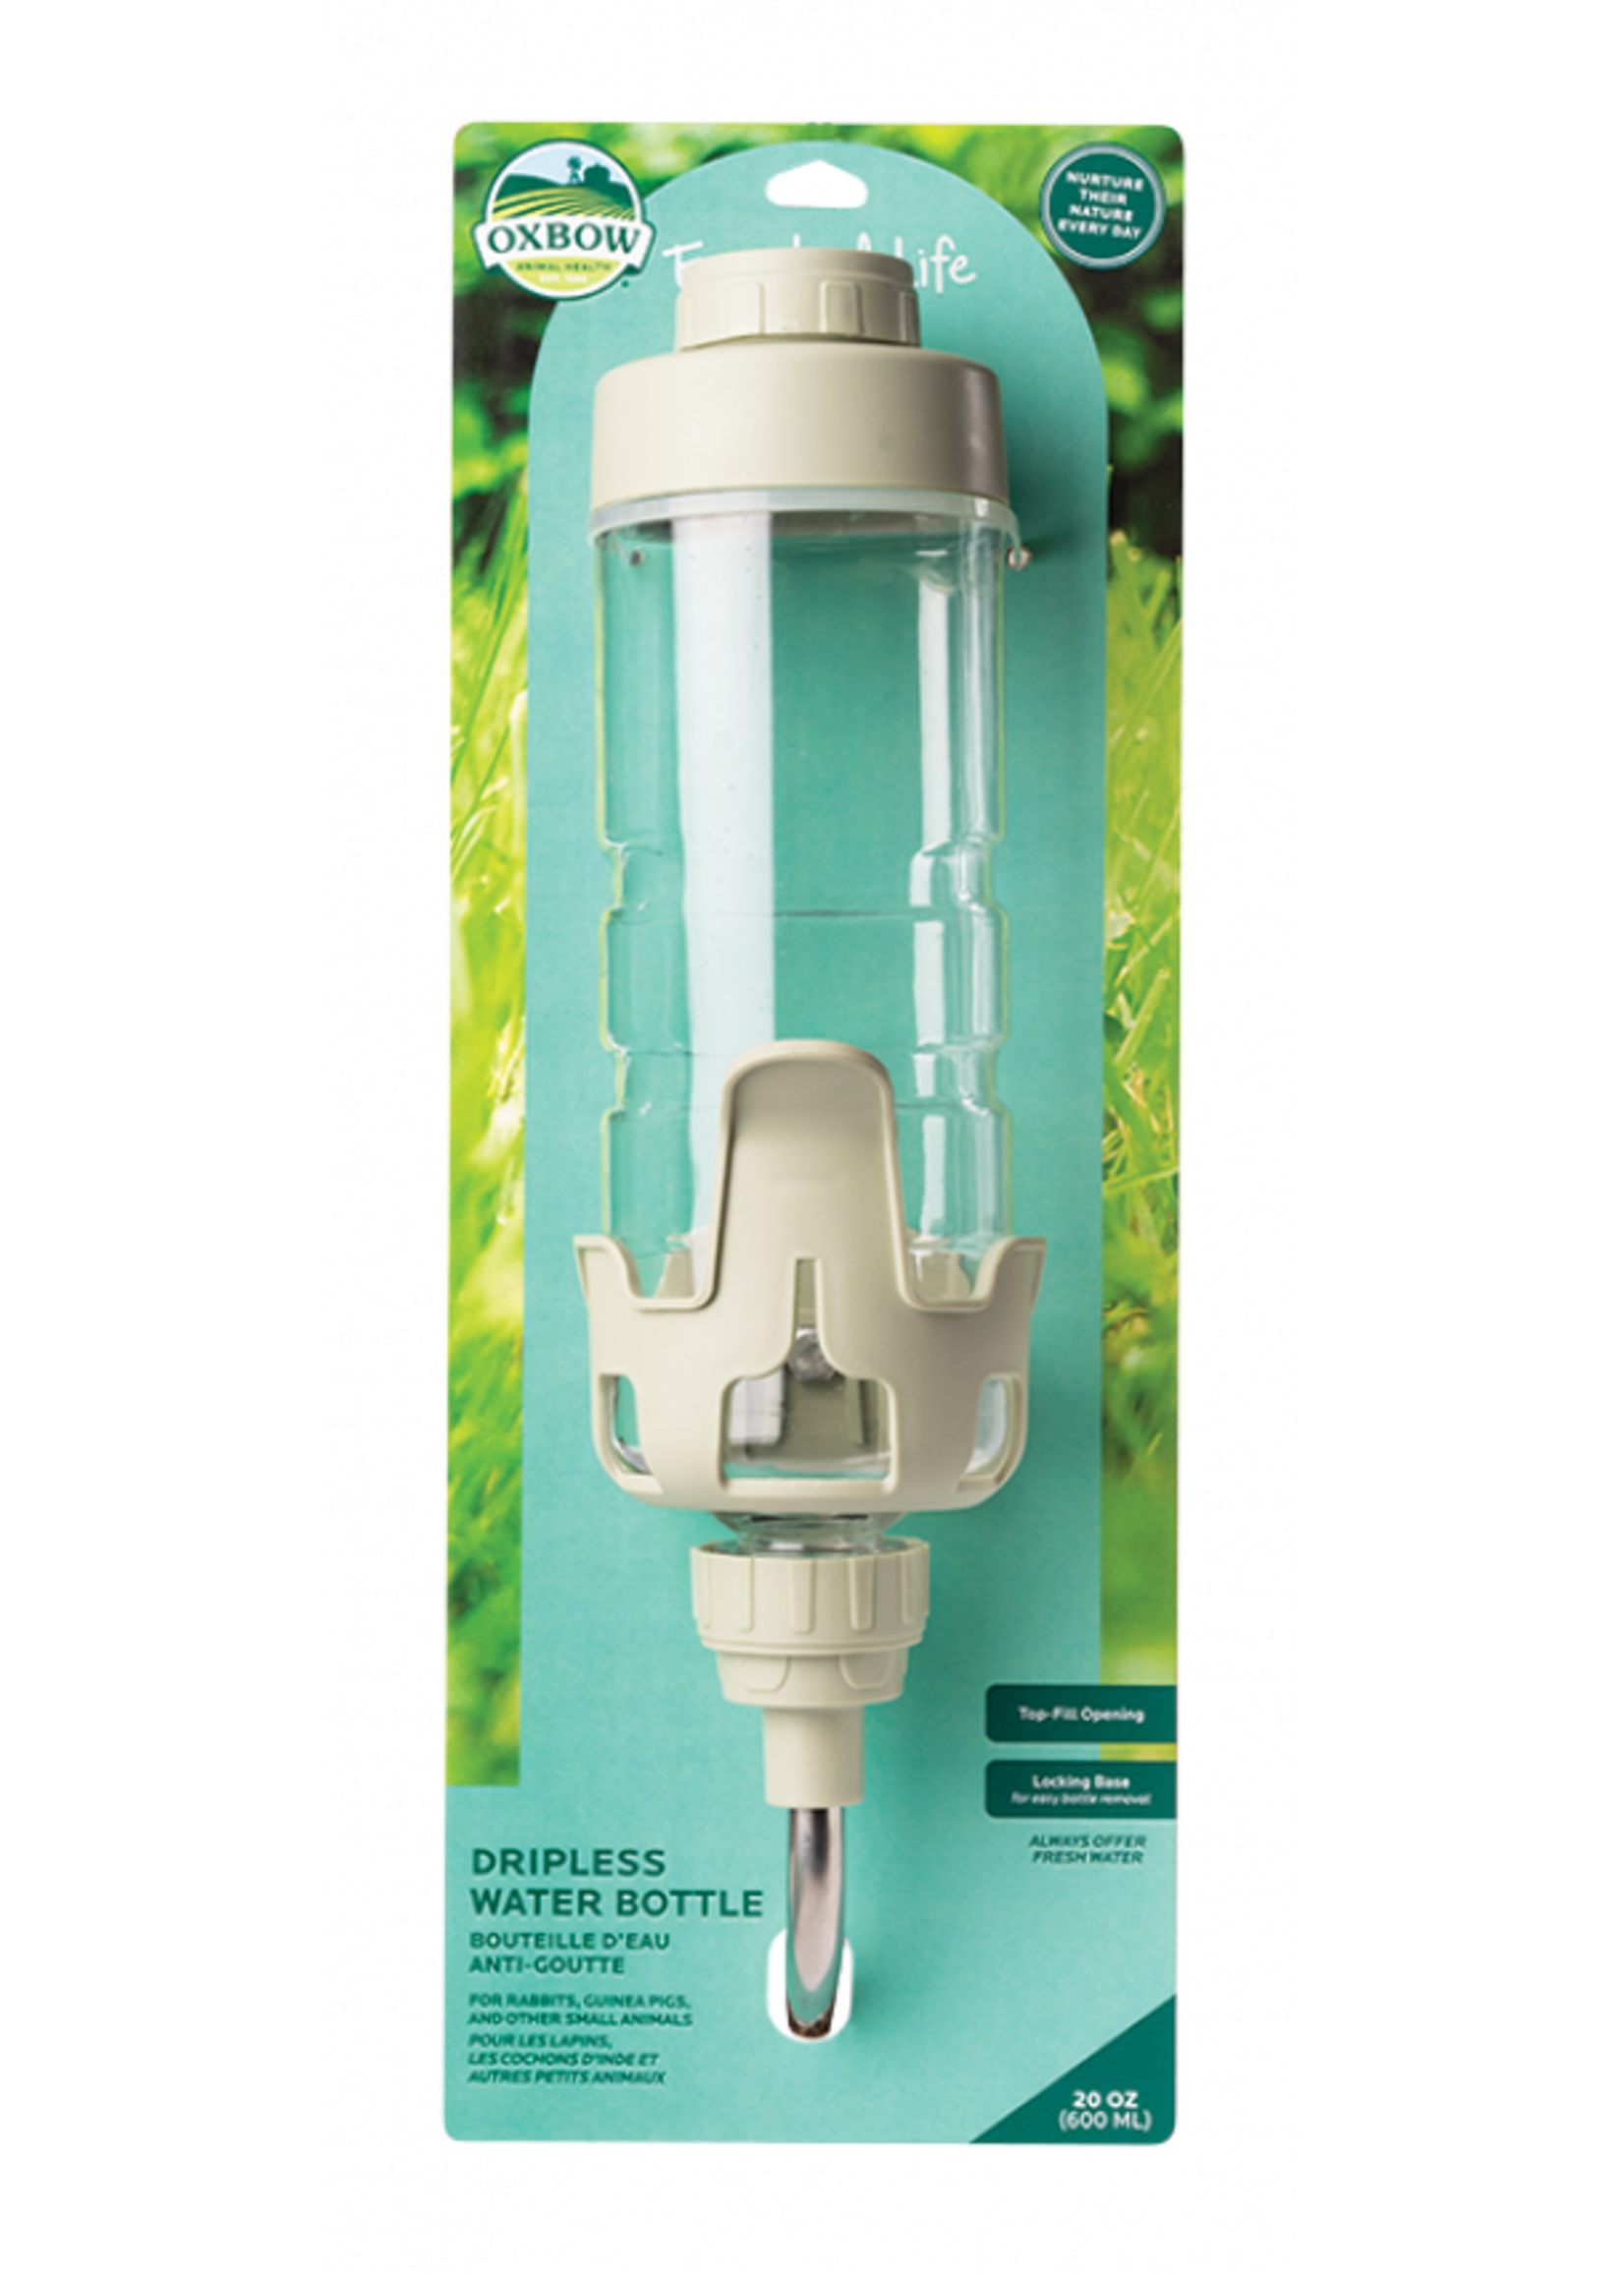 Oxbow Oxbow Enriched Life Dripless Water Bottle Light Green